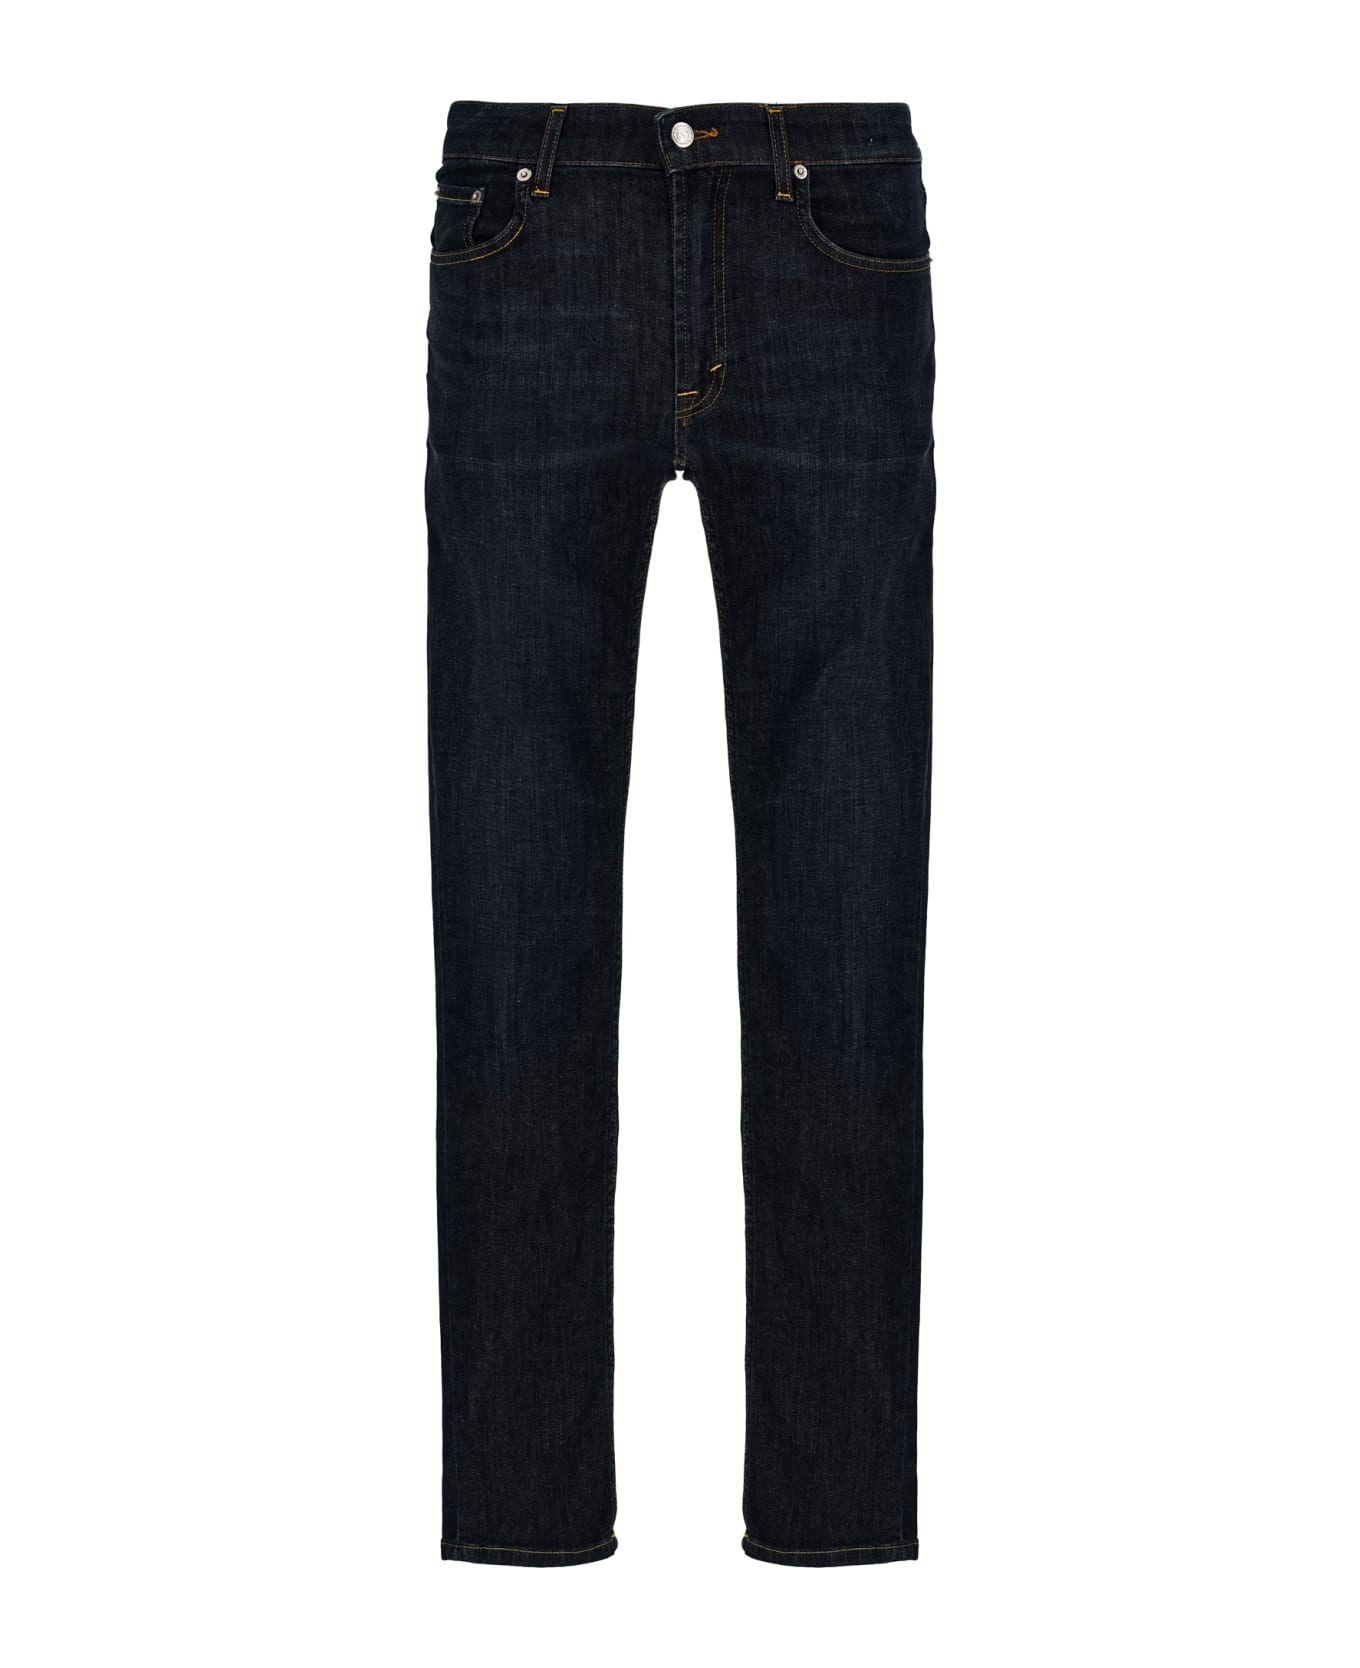 Department Five 'skeith' Jeans - Blue